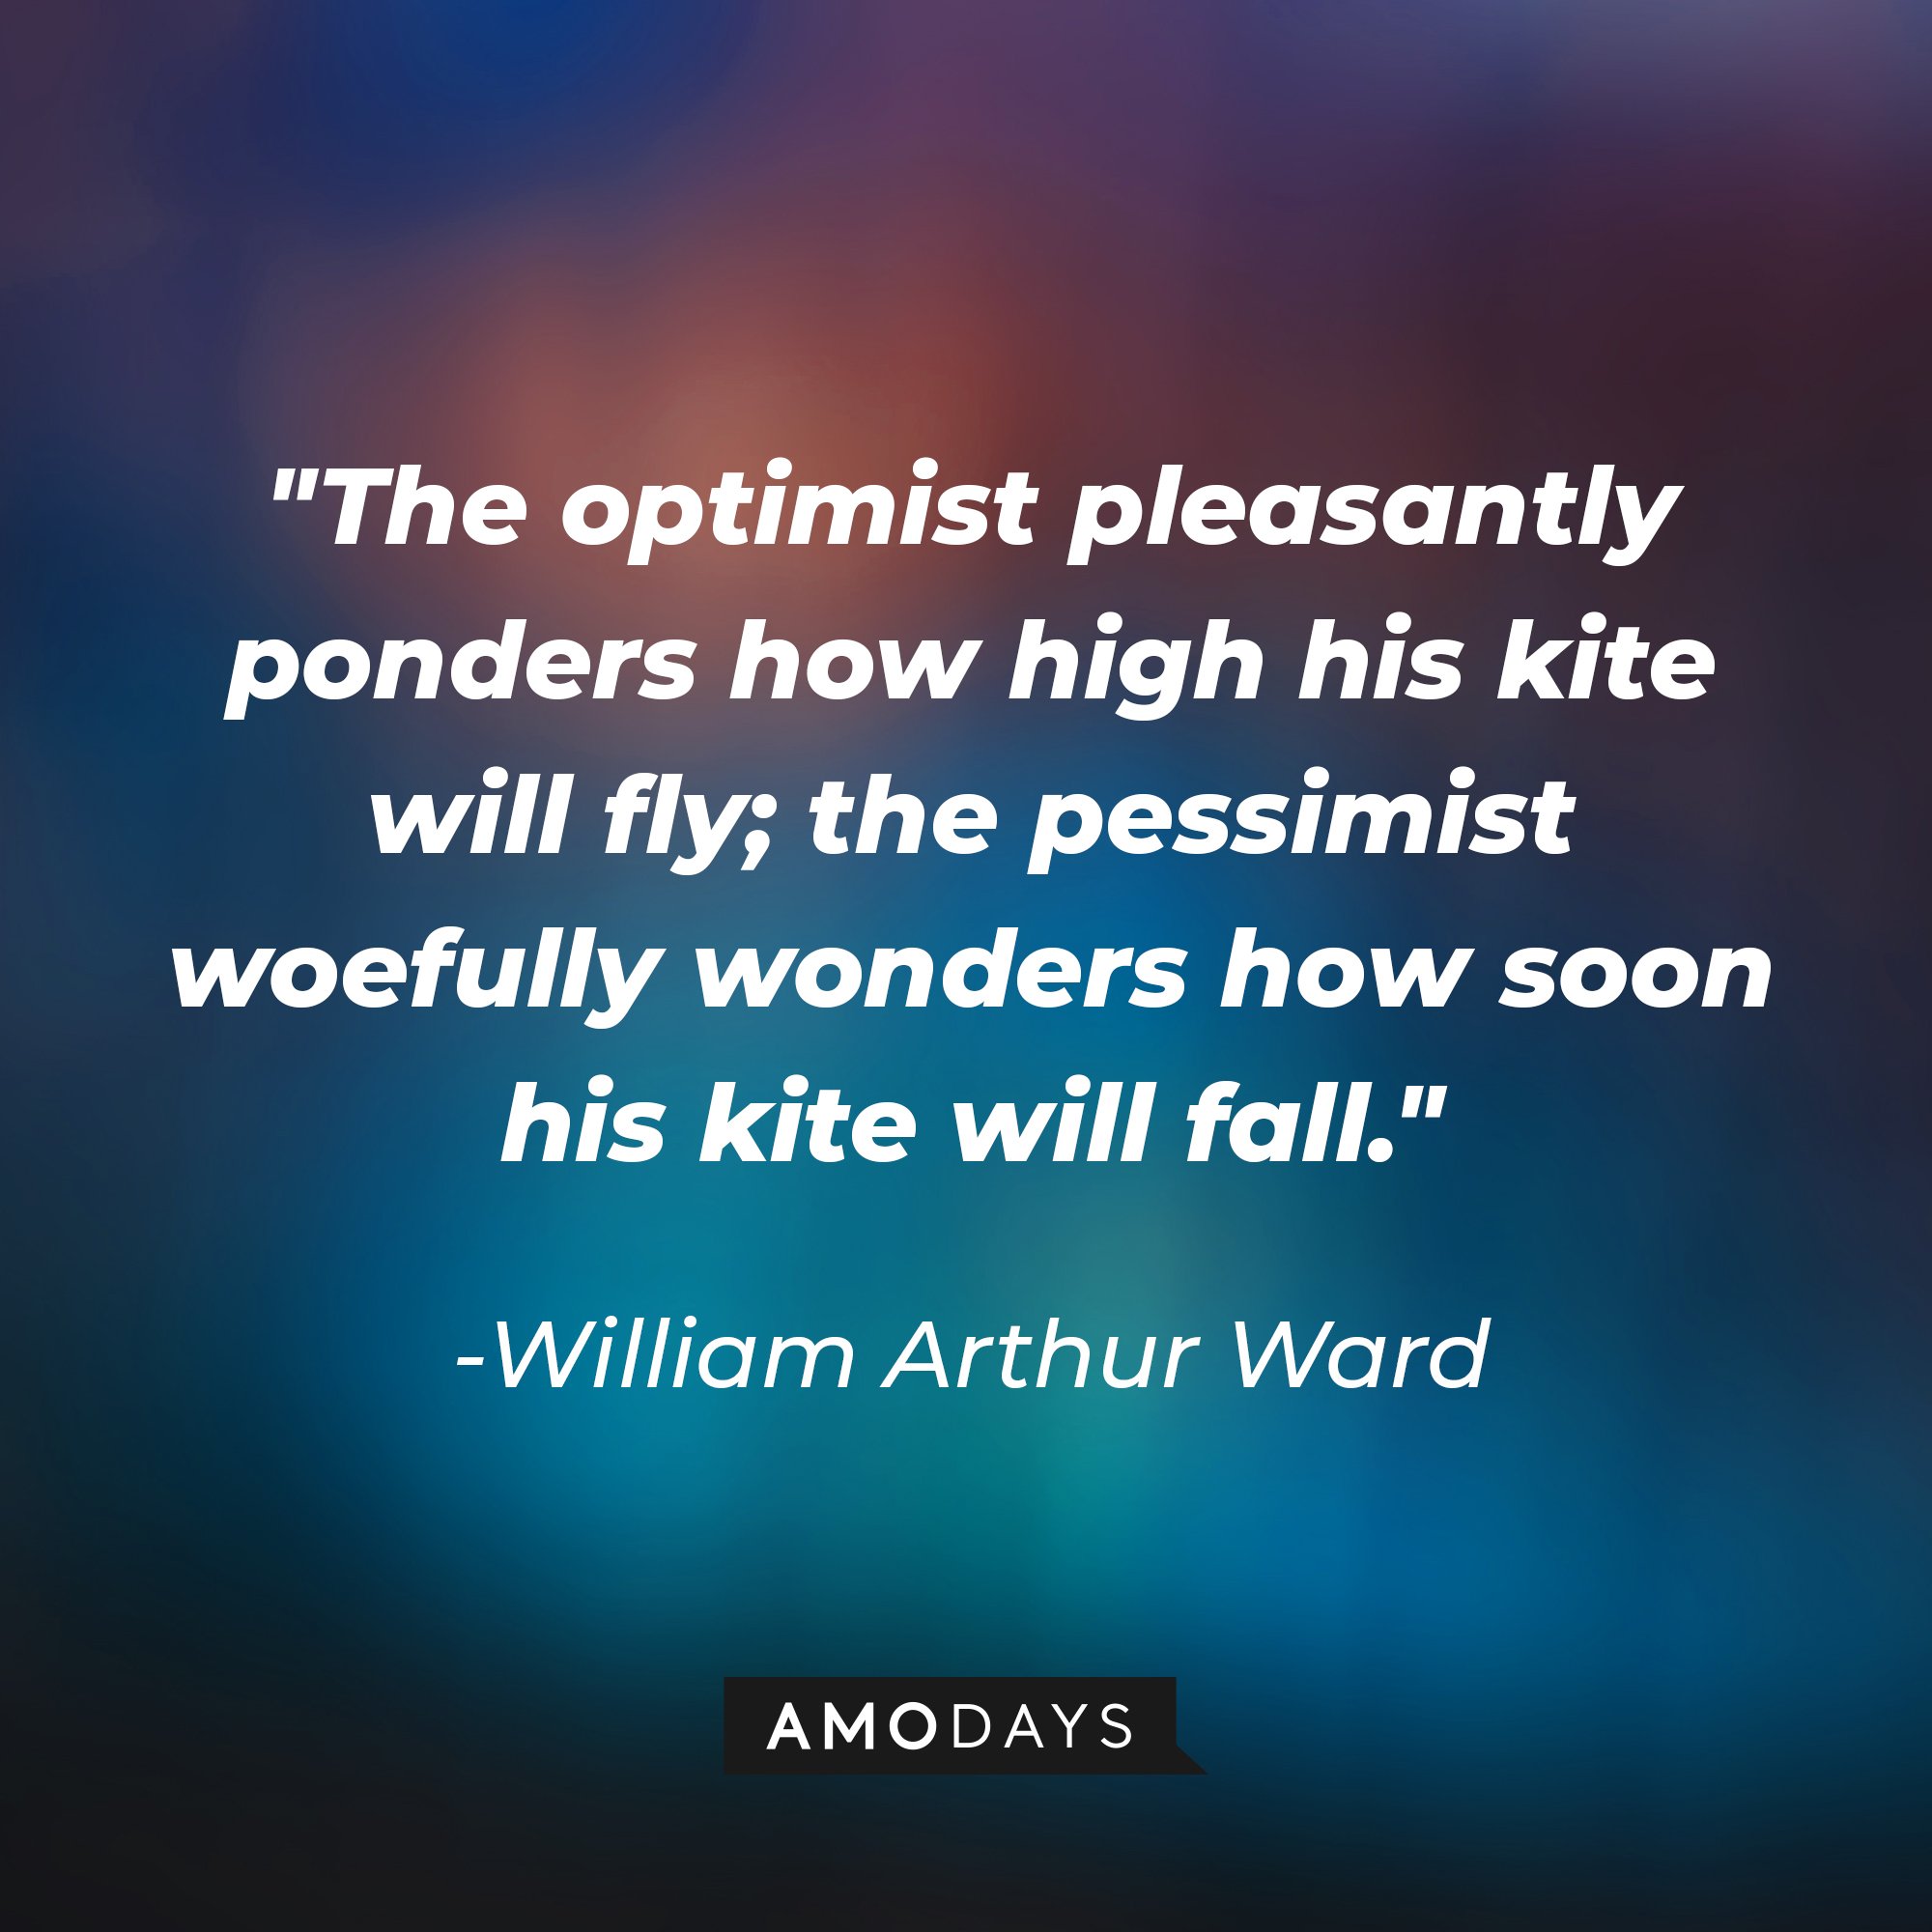 William Arthur Ward’s quote:  "The optimist pleasantly ponders how high his kite will fly; the pessimist woefully wonders how soon his kite will fall." | Image: AmoDays